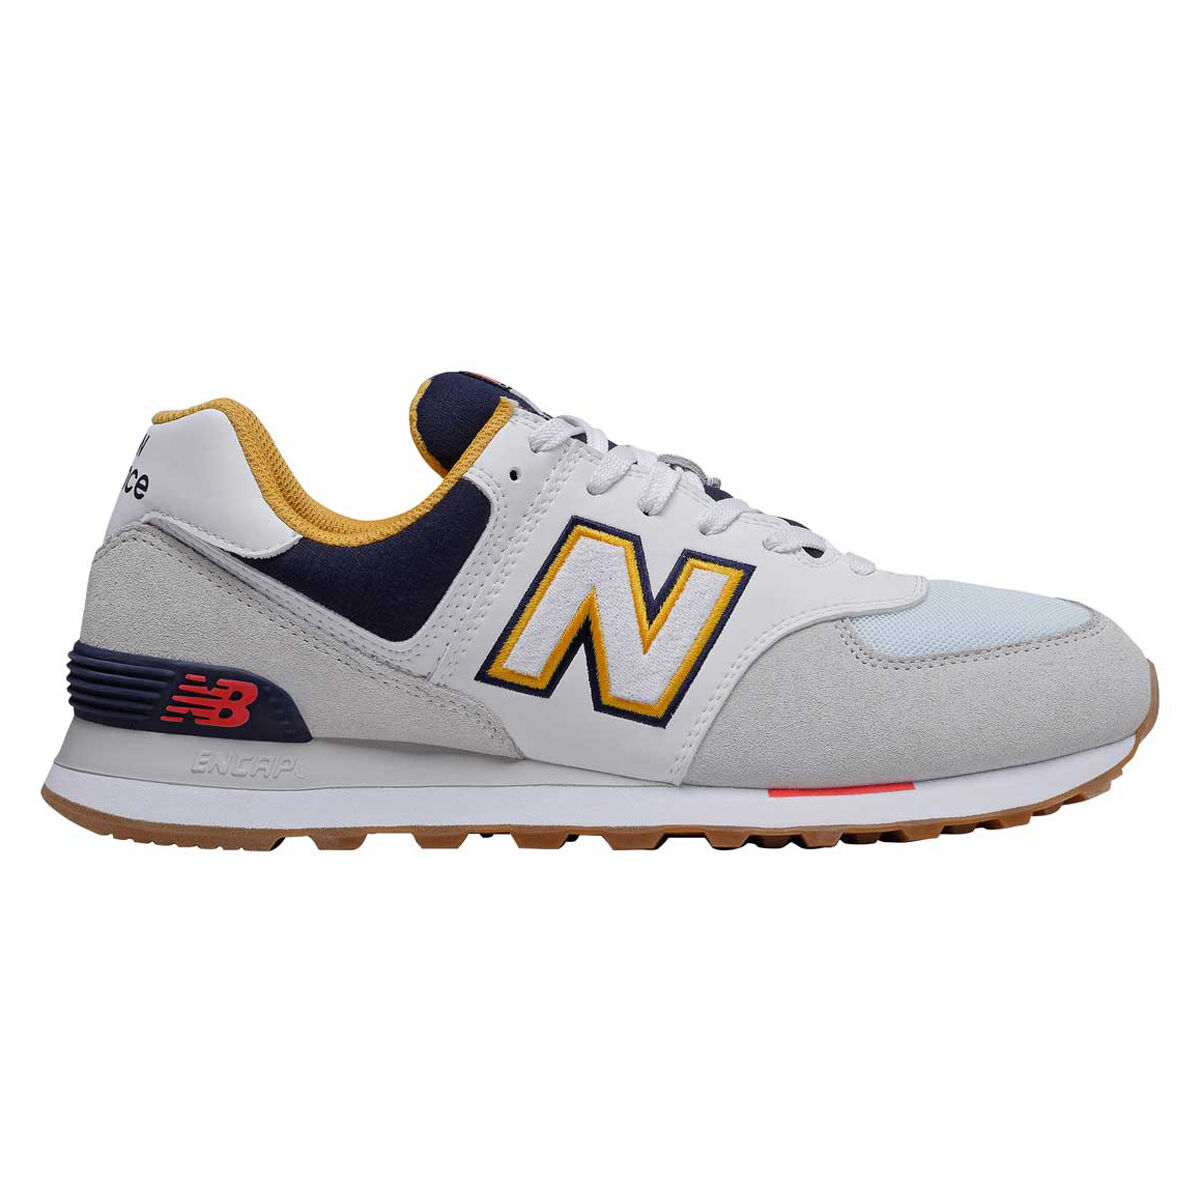 discount new balance tennis shoes